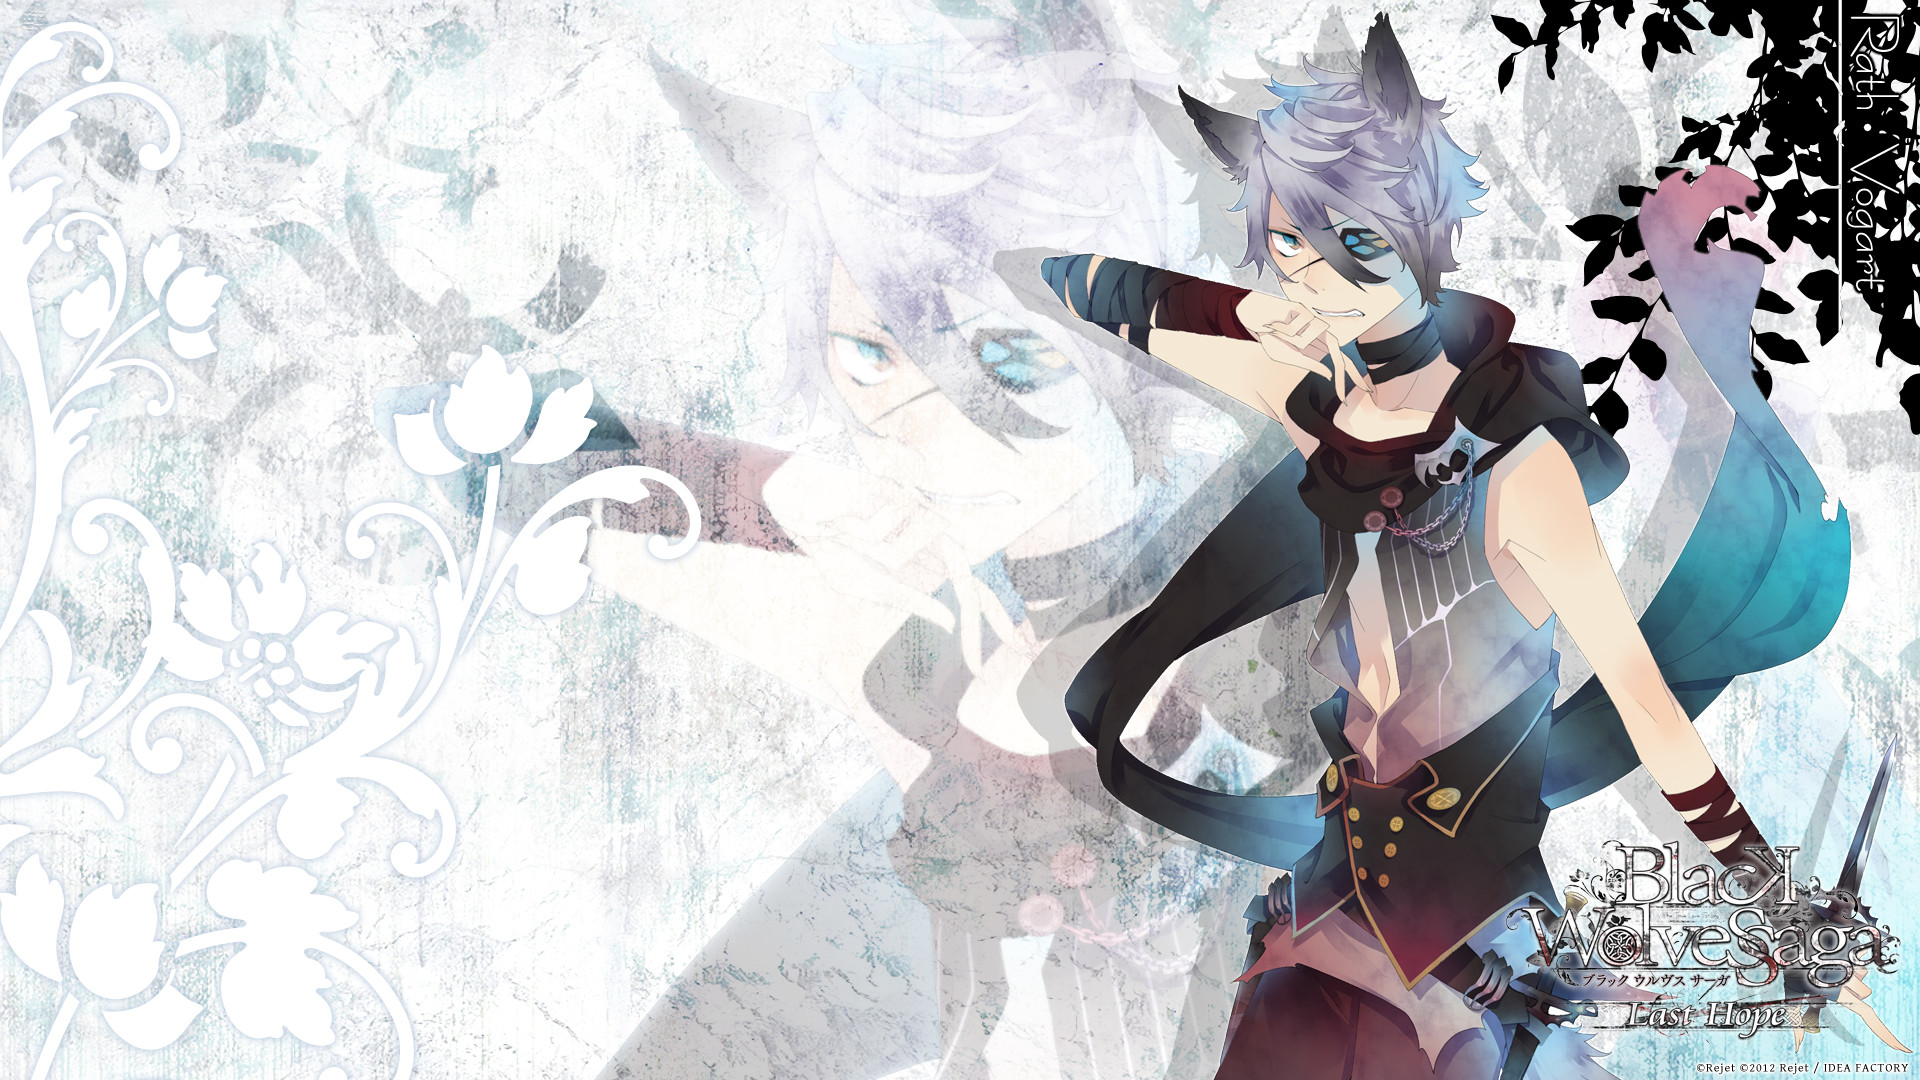 1920x1080 Widescreen Wallpapers of Anime Wolf, Amazing Wallpapers